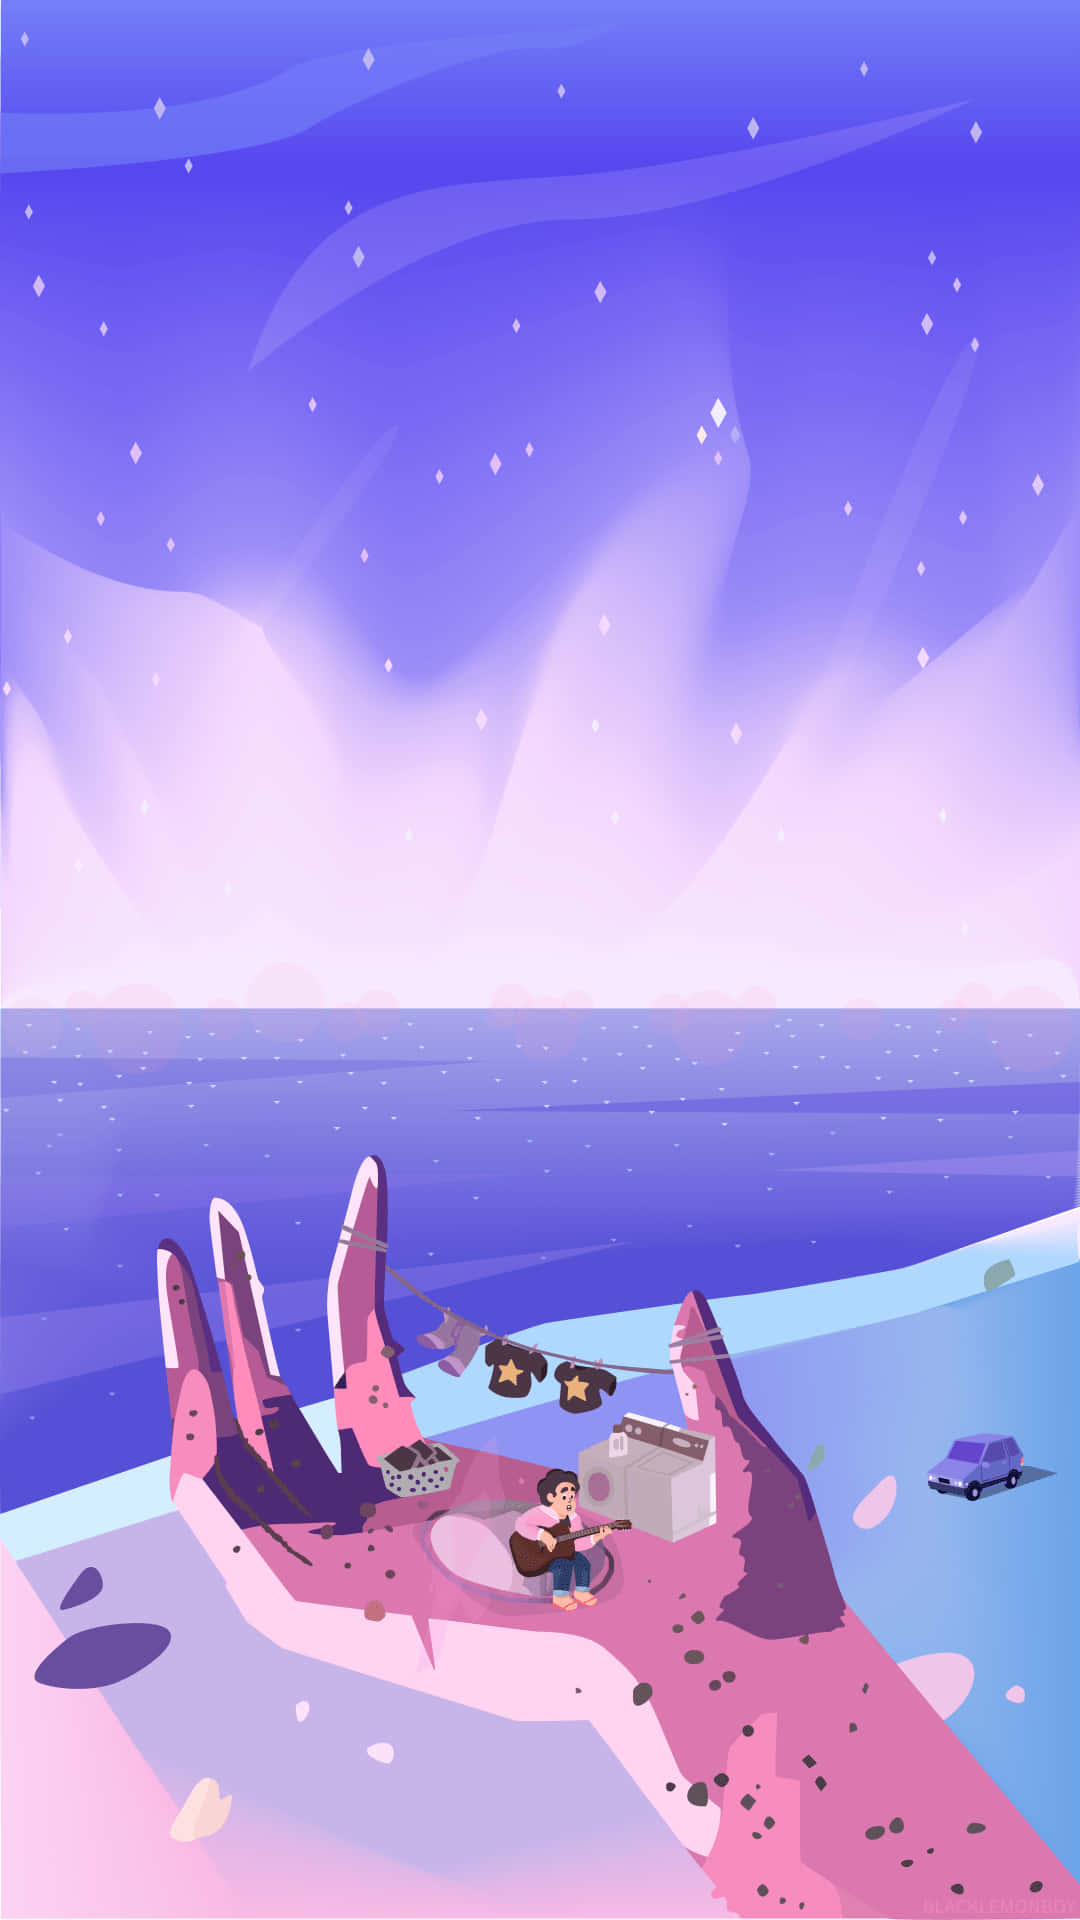 Stay connected to your favorite characters with Steven Universe Phone Wallpaper